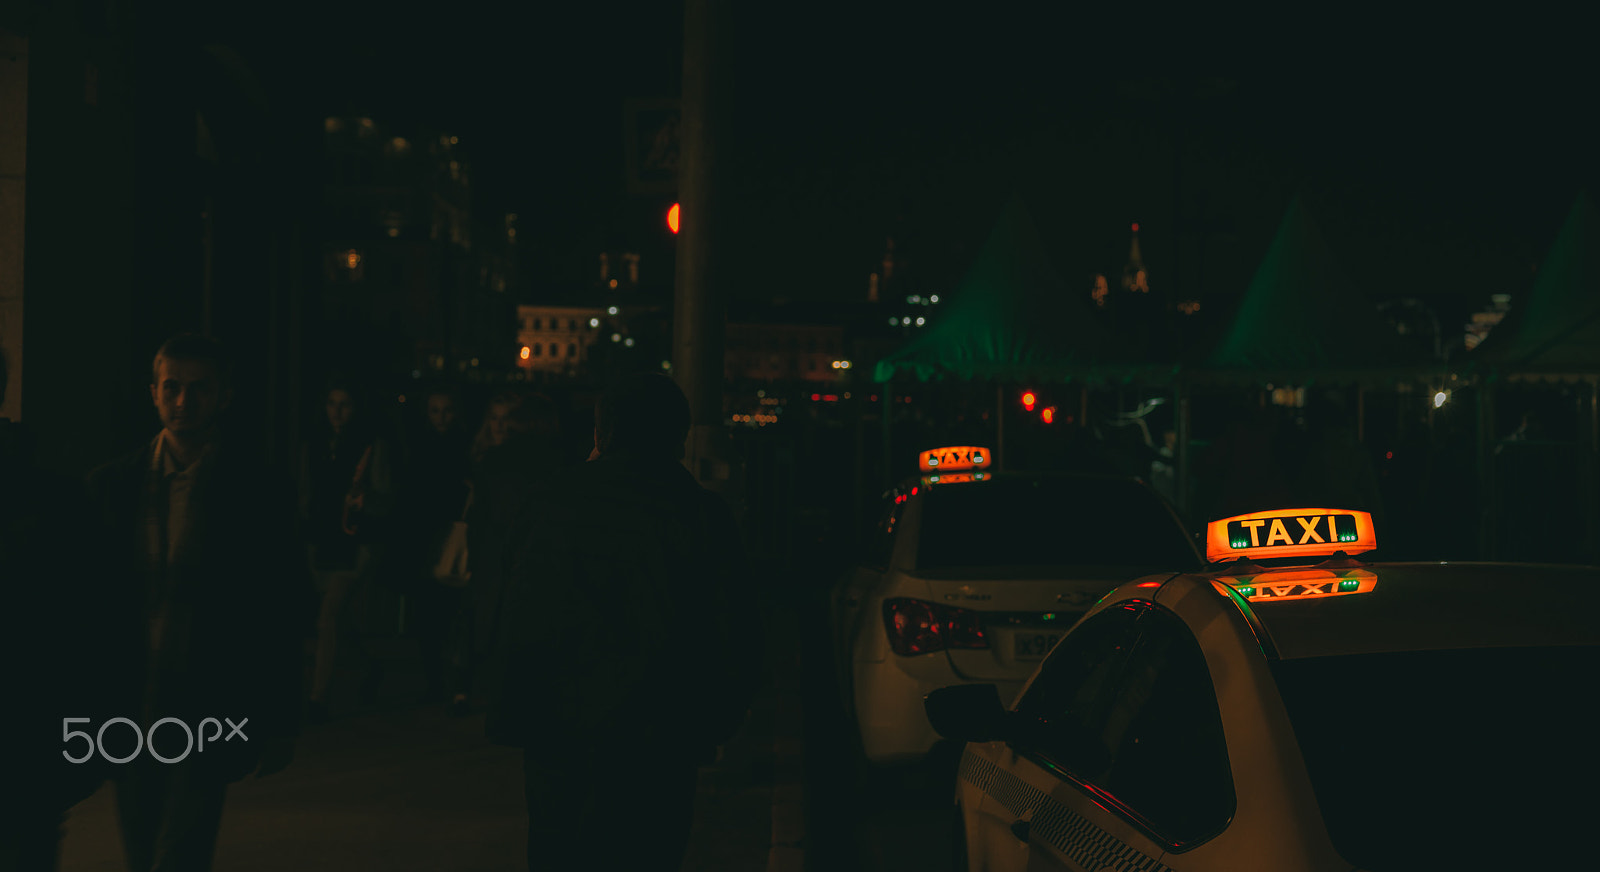 Sony a7R II + Sony 50mm F1.4 sample photo. Those night taxis photography